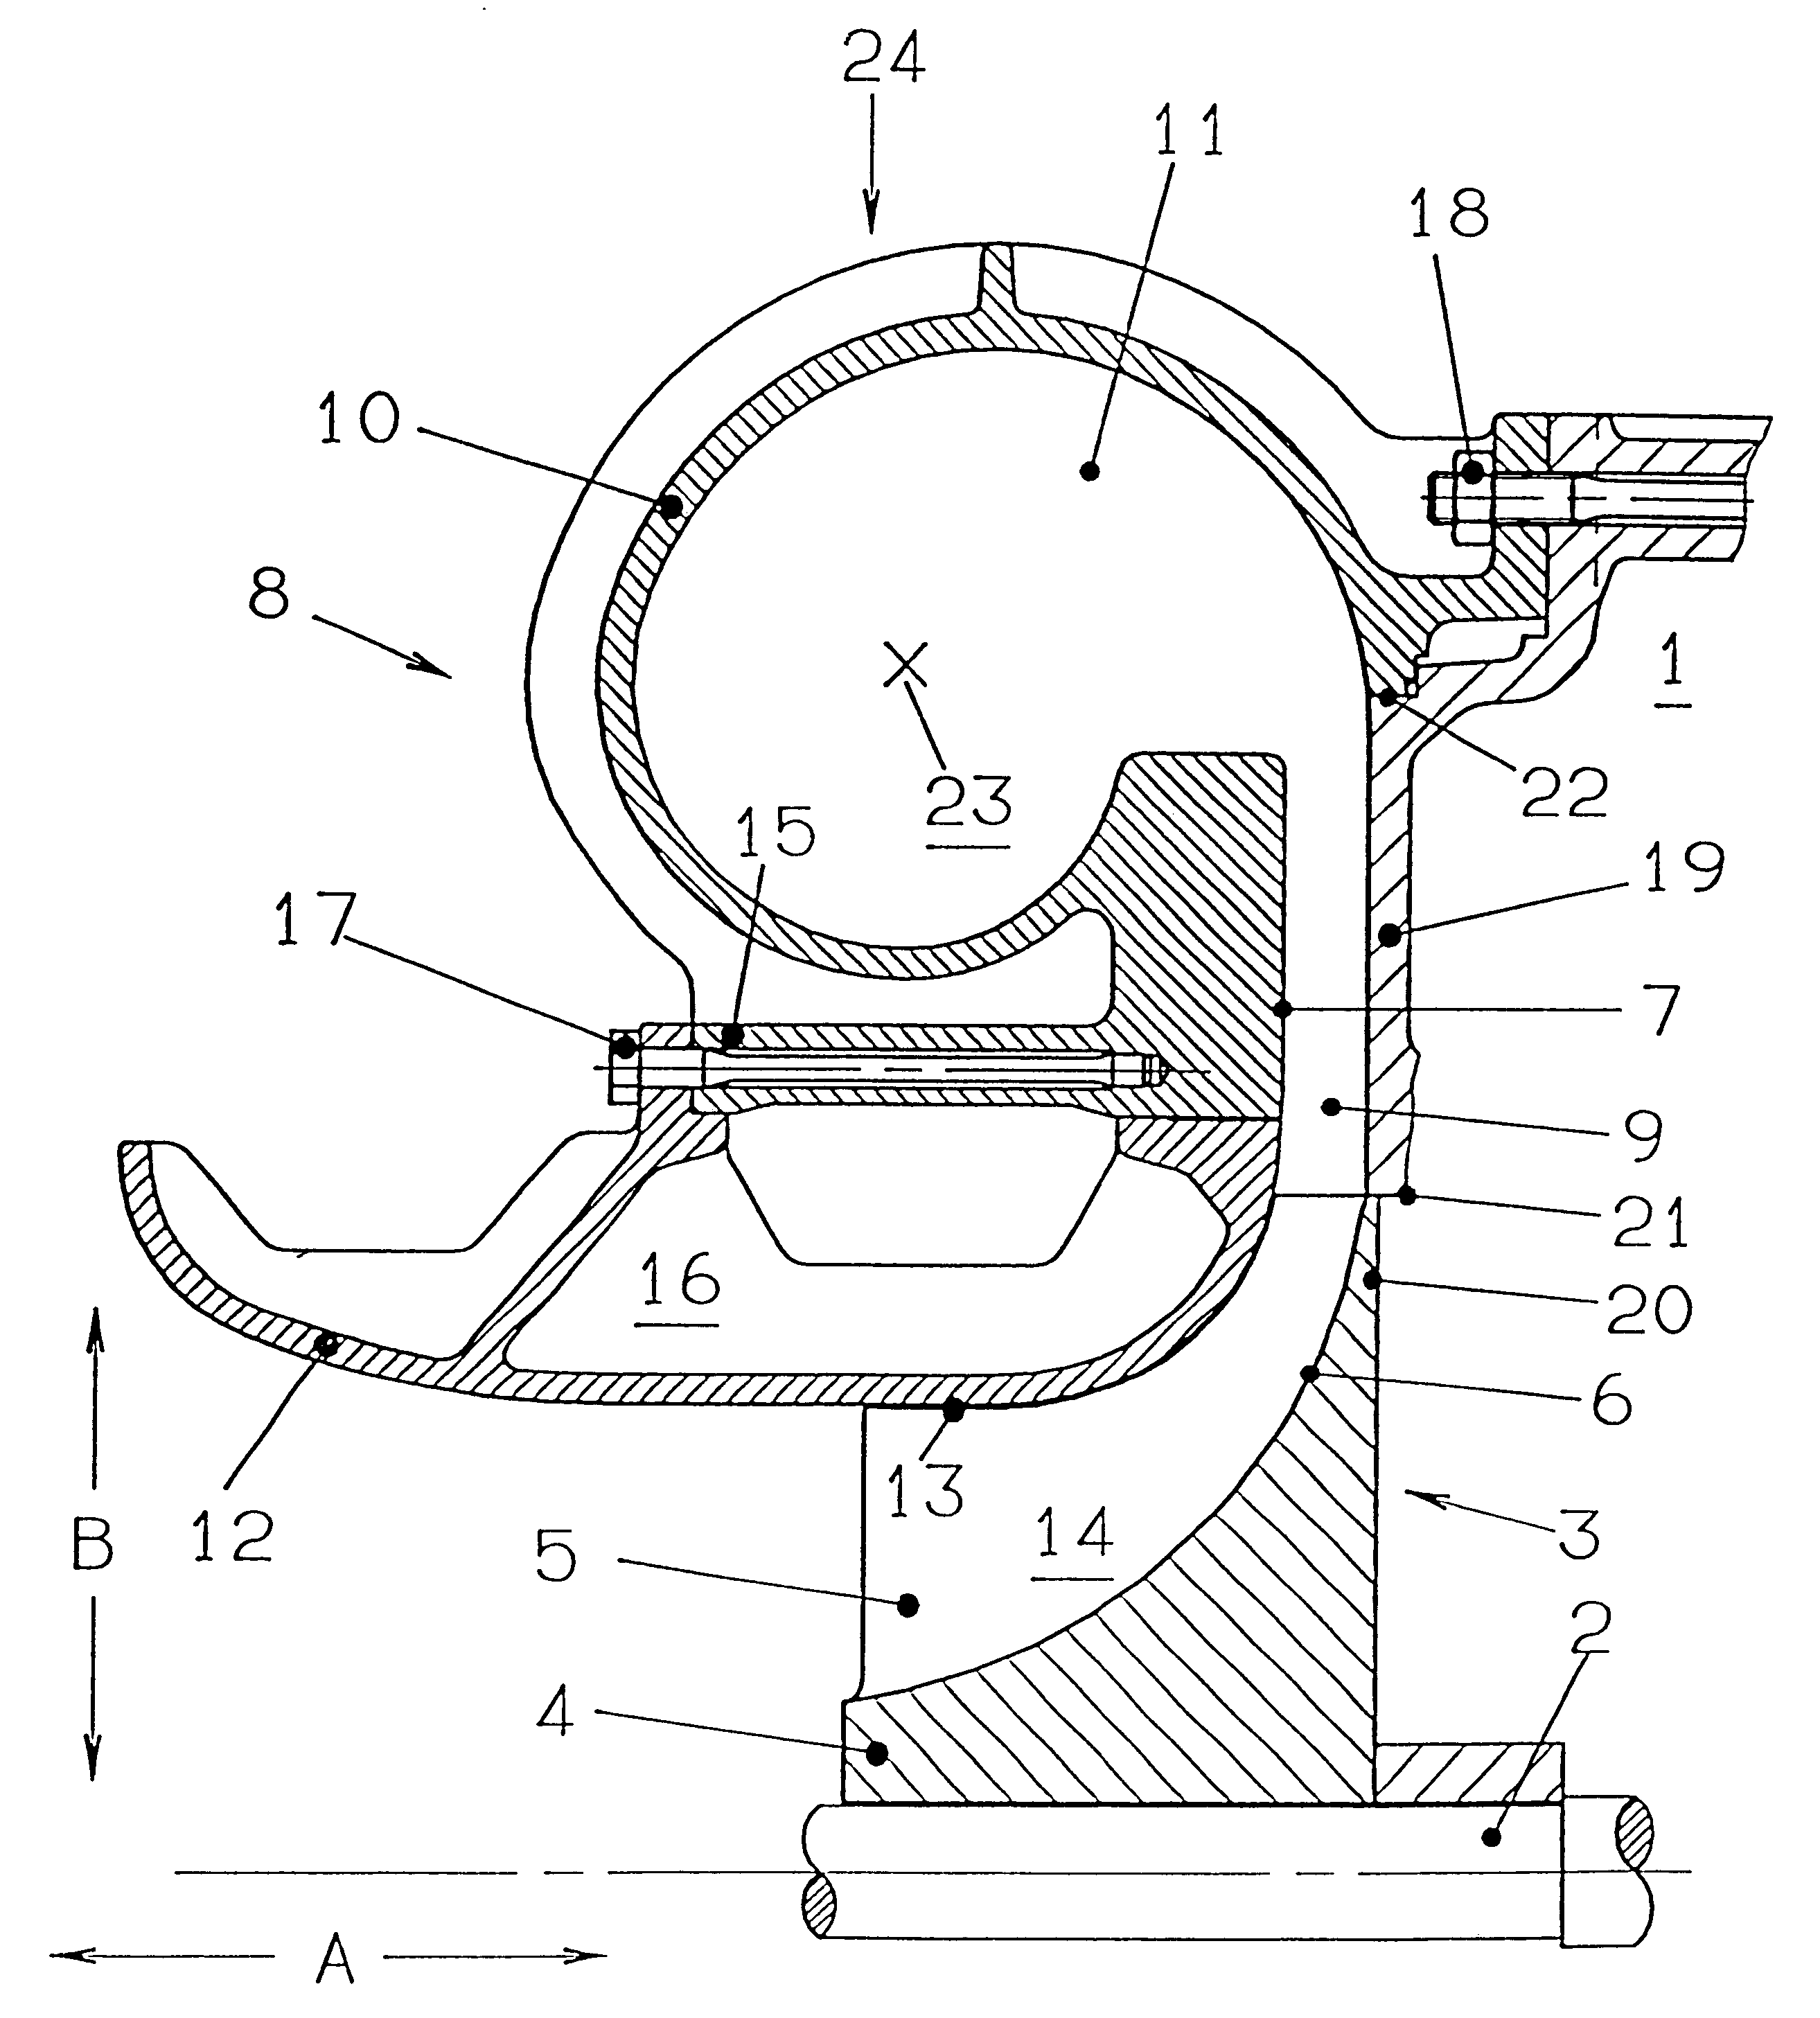 Turbomachine with radial-flow compressor impeller